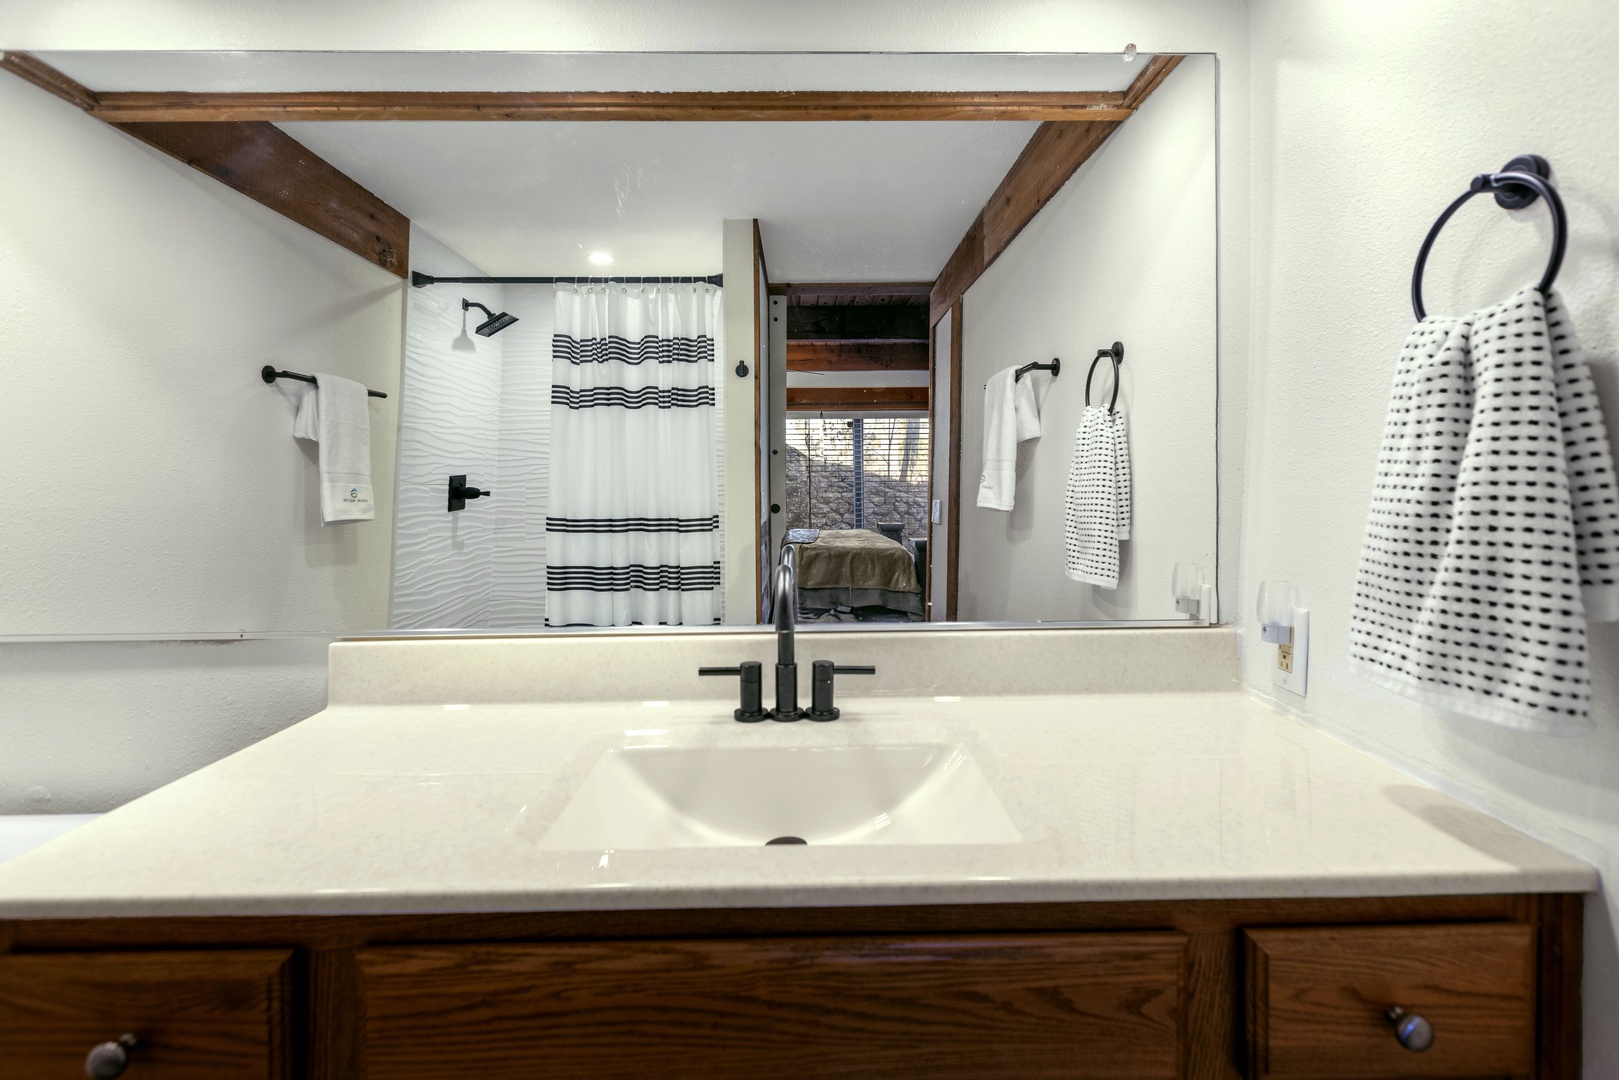 This ensuite bath features a large single vanity & walk-in shower